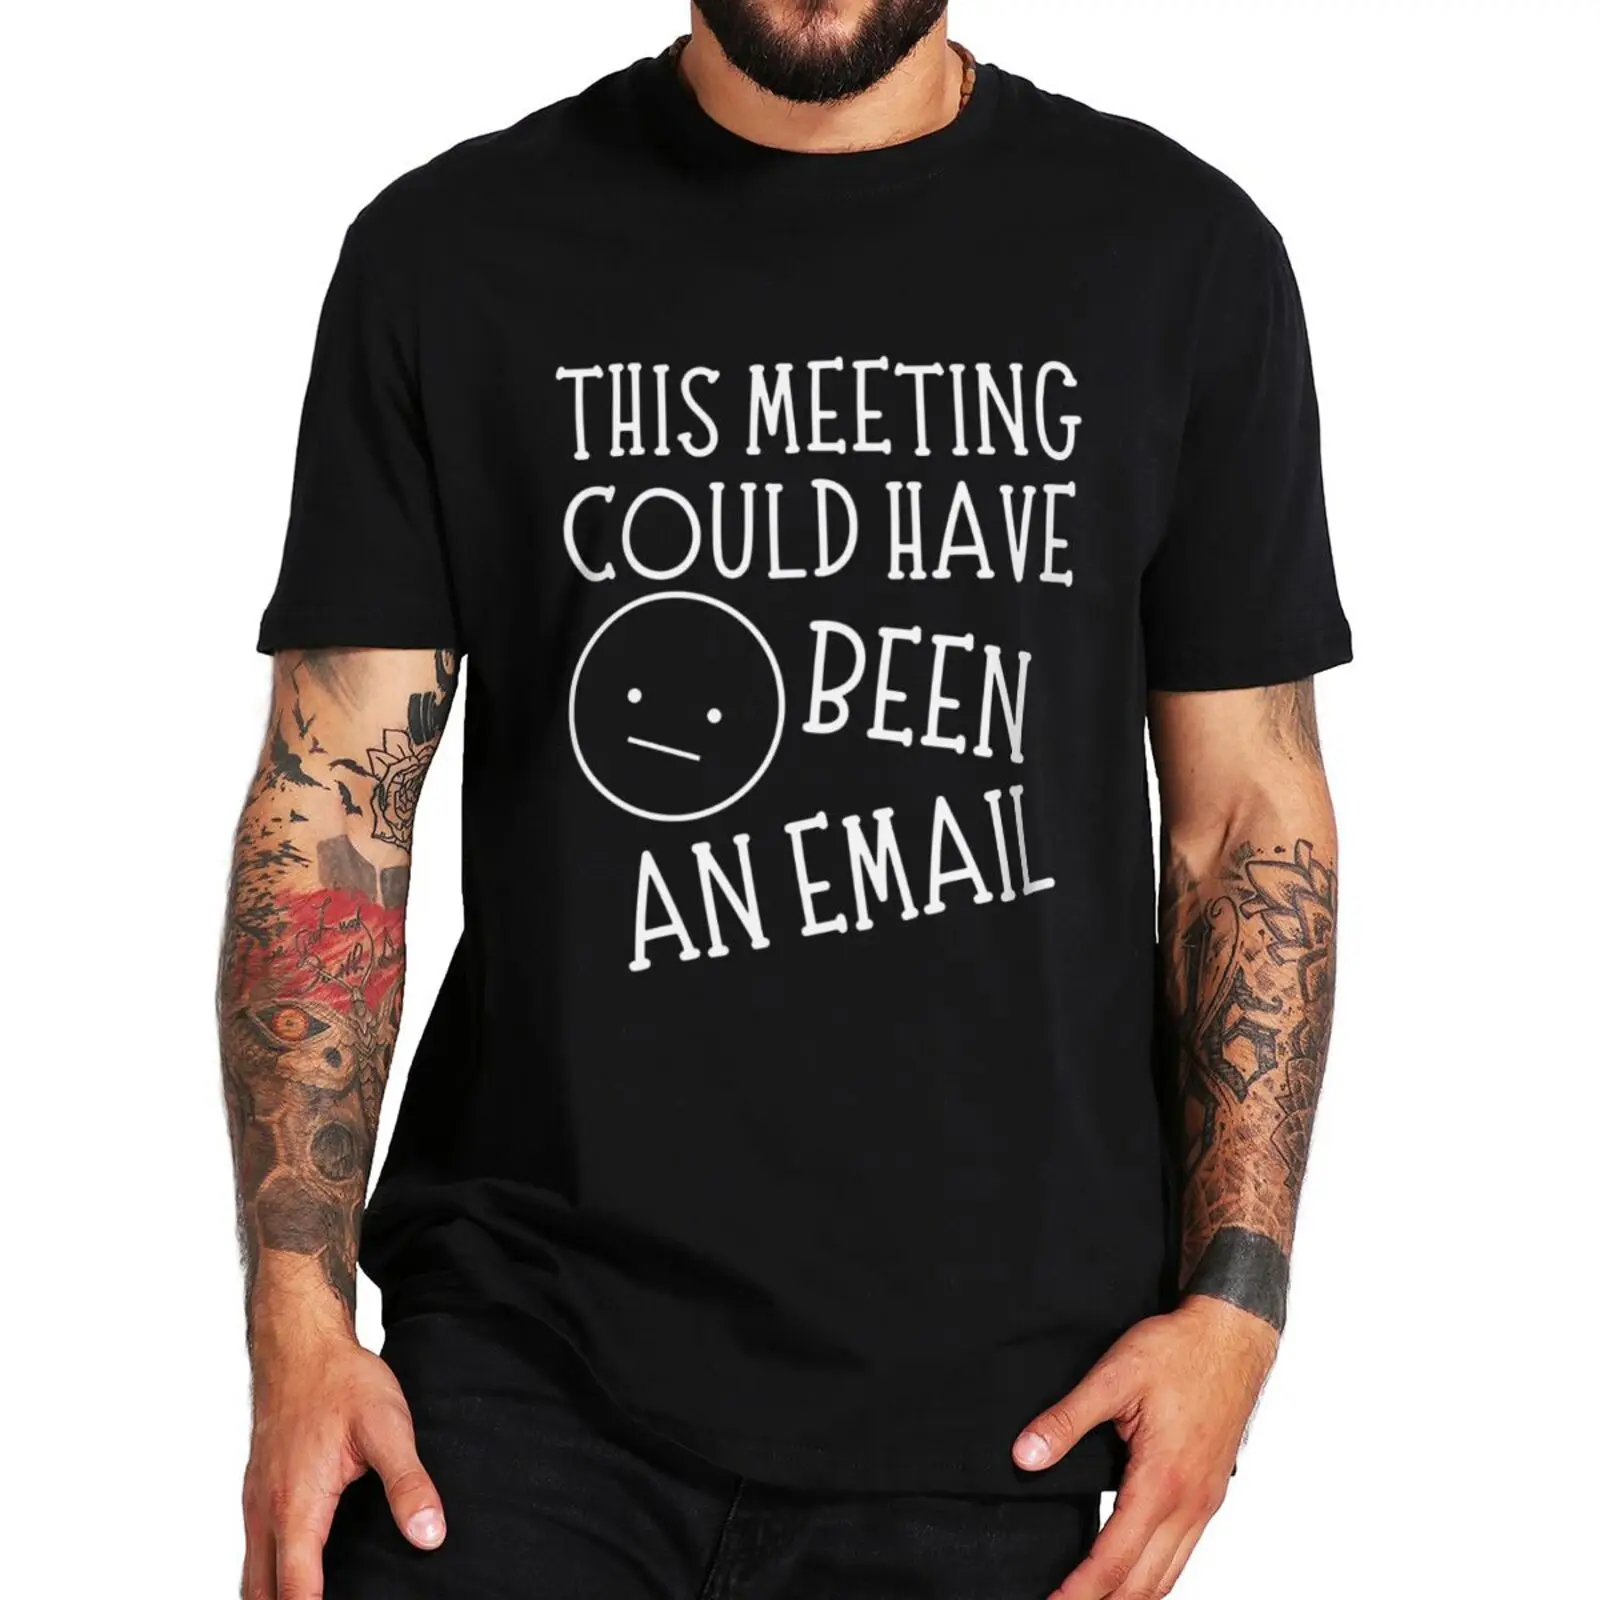 

This Meeting Could Have Been An Email T Shirt Funny Job Saying Jokes Short Sleeve 100% Cotton Casual O-neck T-shirt EU Size